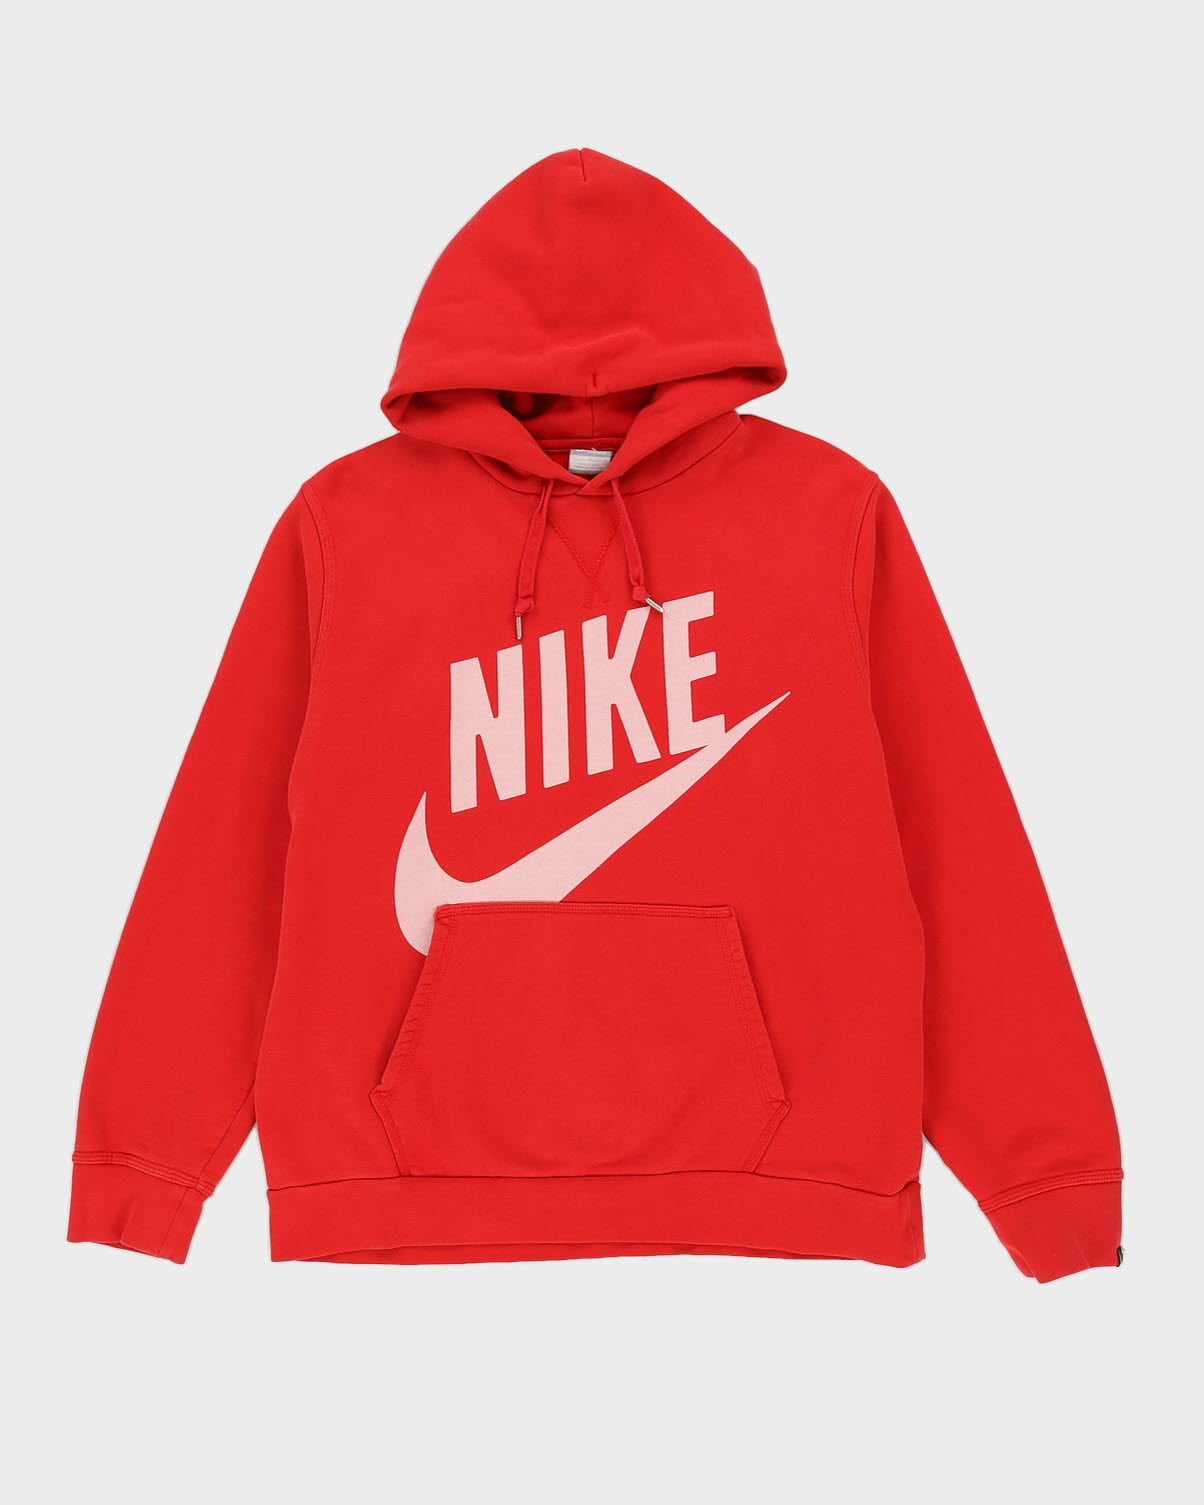 00s Nike Red Hoodie With Big Logo - L